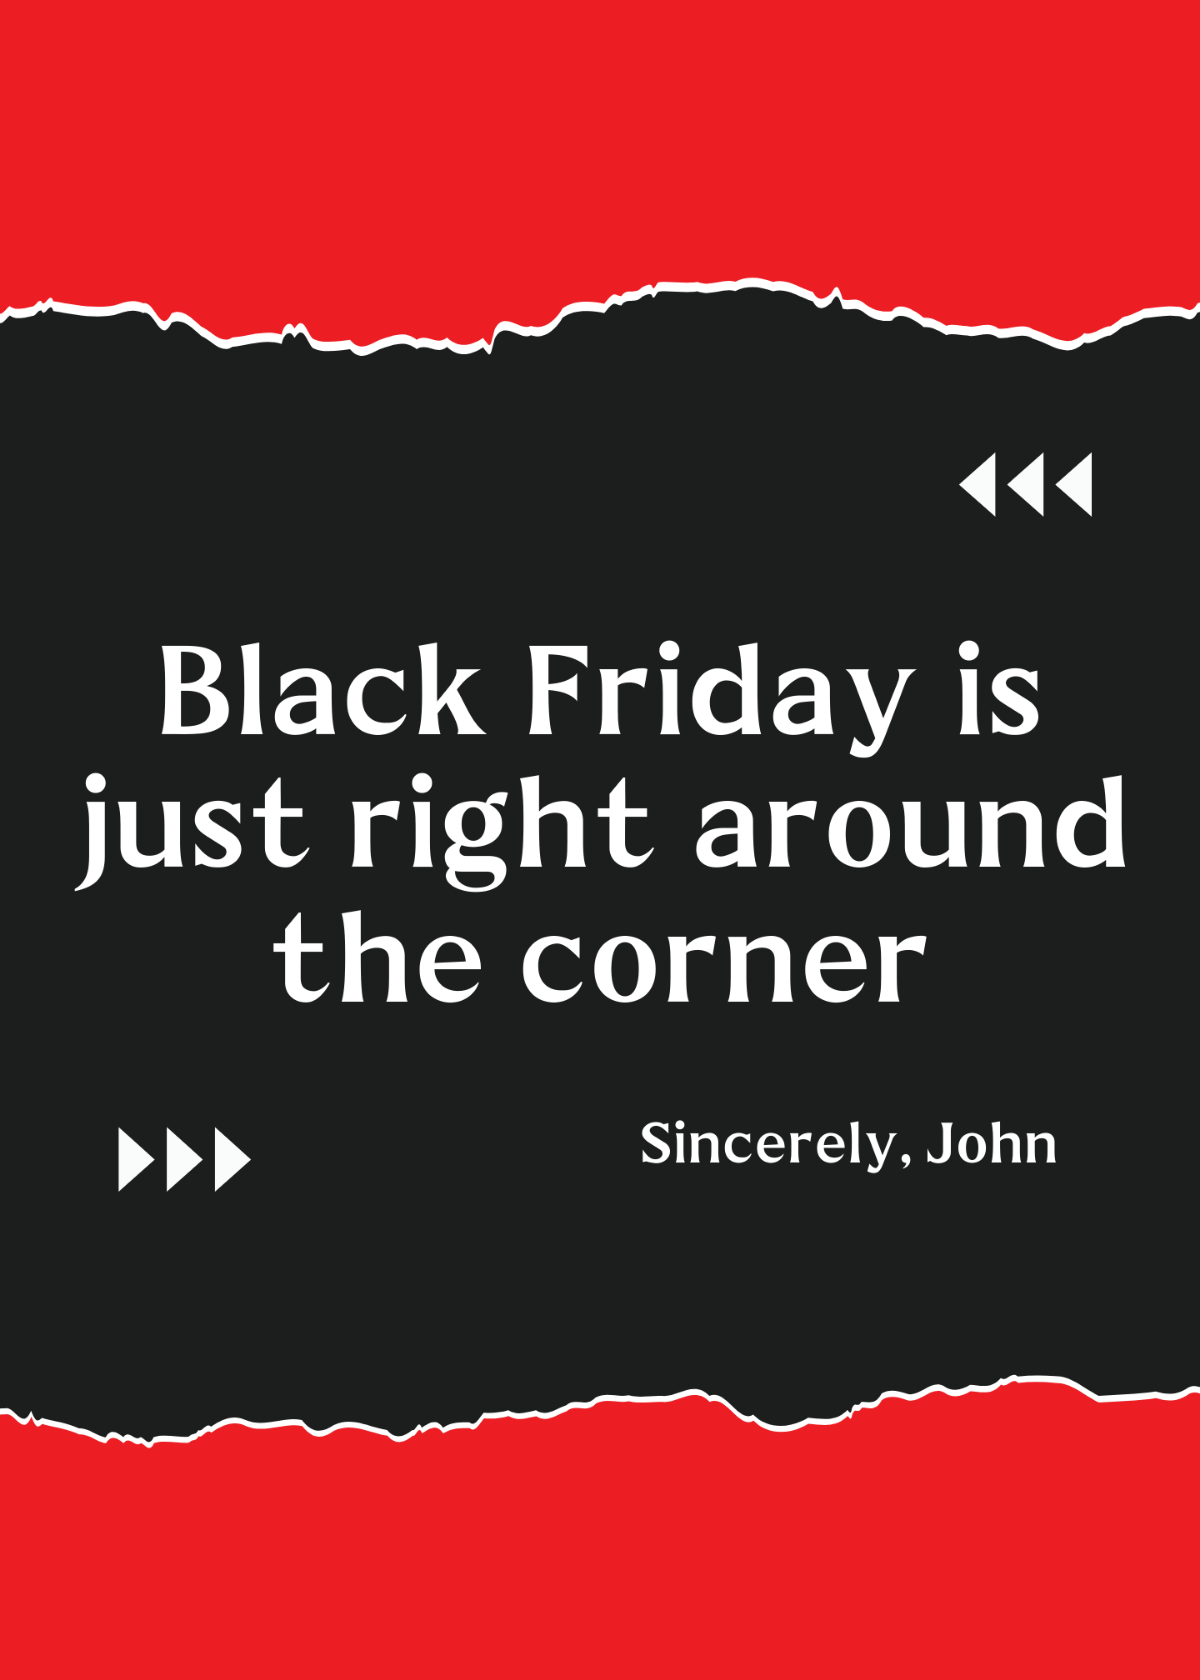 Black Friday Greeting Template